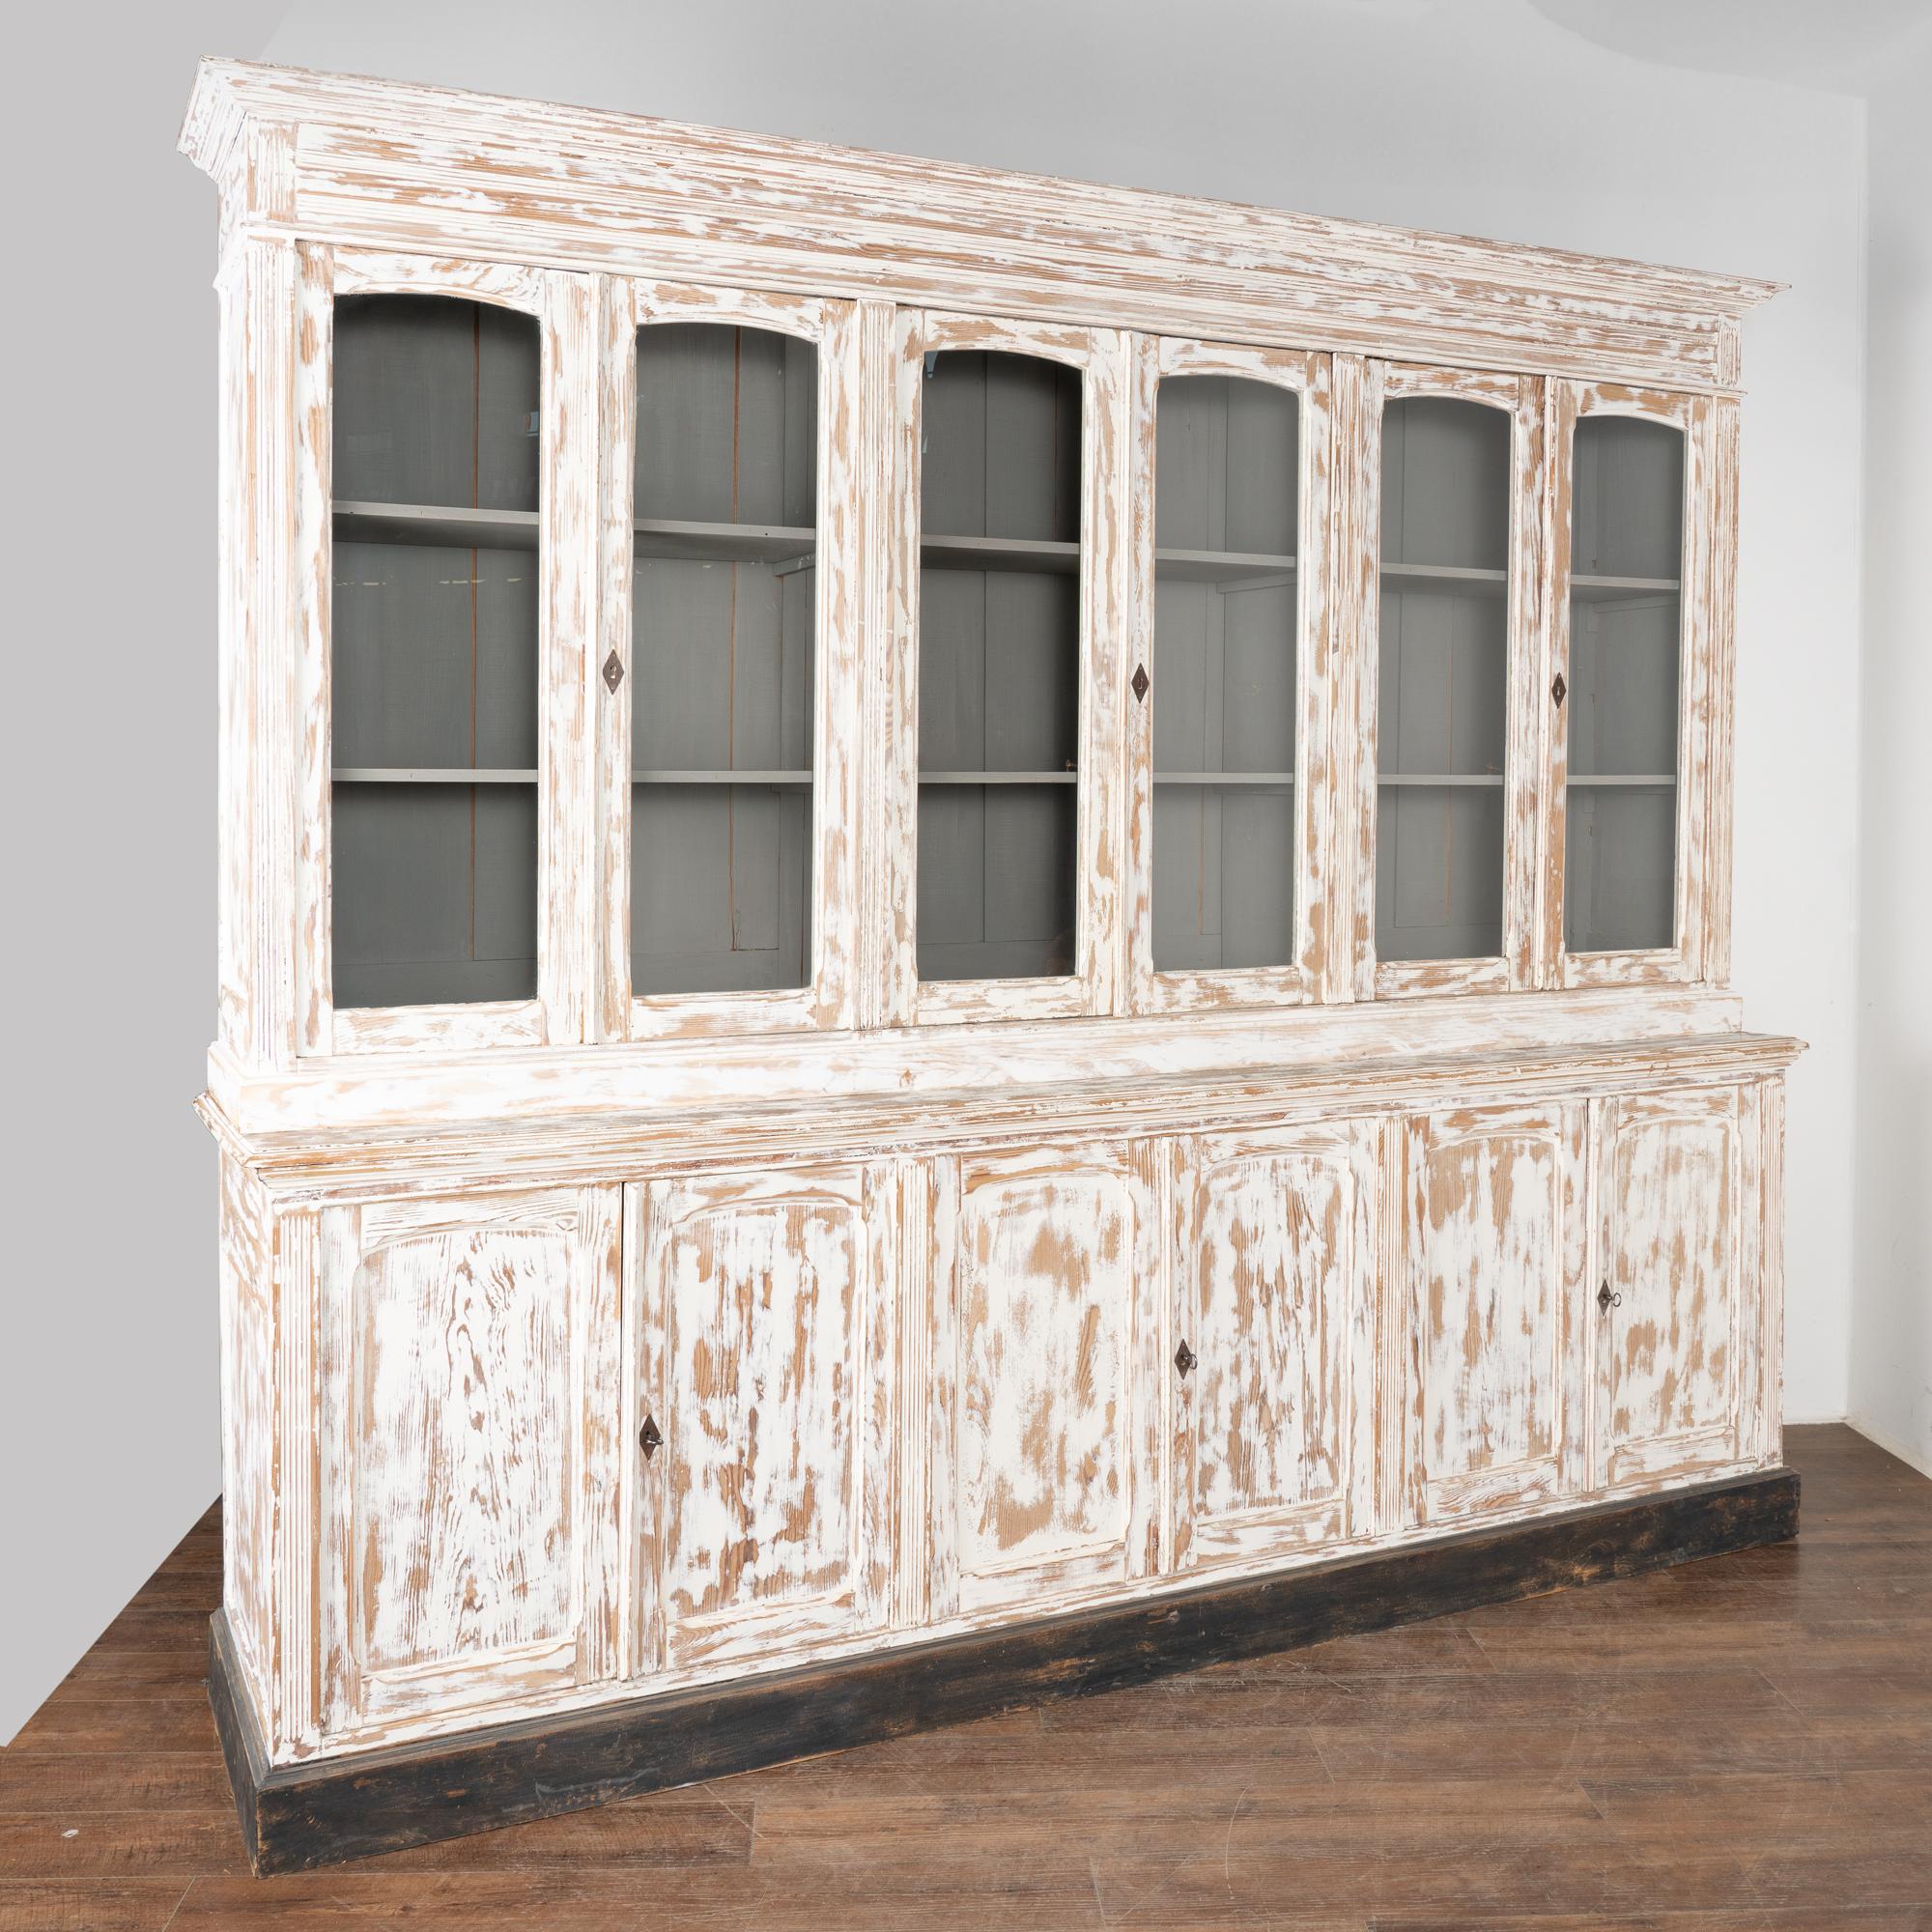 French country large display cabinet or bookcase in two sections. Six glass doors over six paneled cabinet doors.
Pine wood later painted in white, rubbed out and distressed; interior and shelving painted gray, baseboard is black.
Restored,